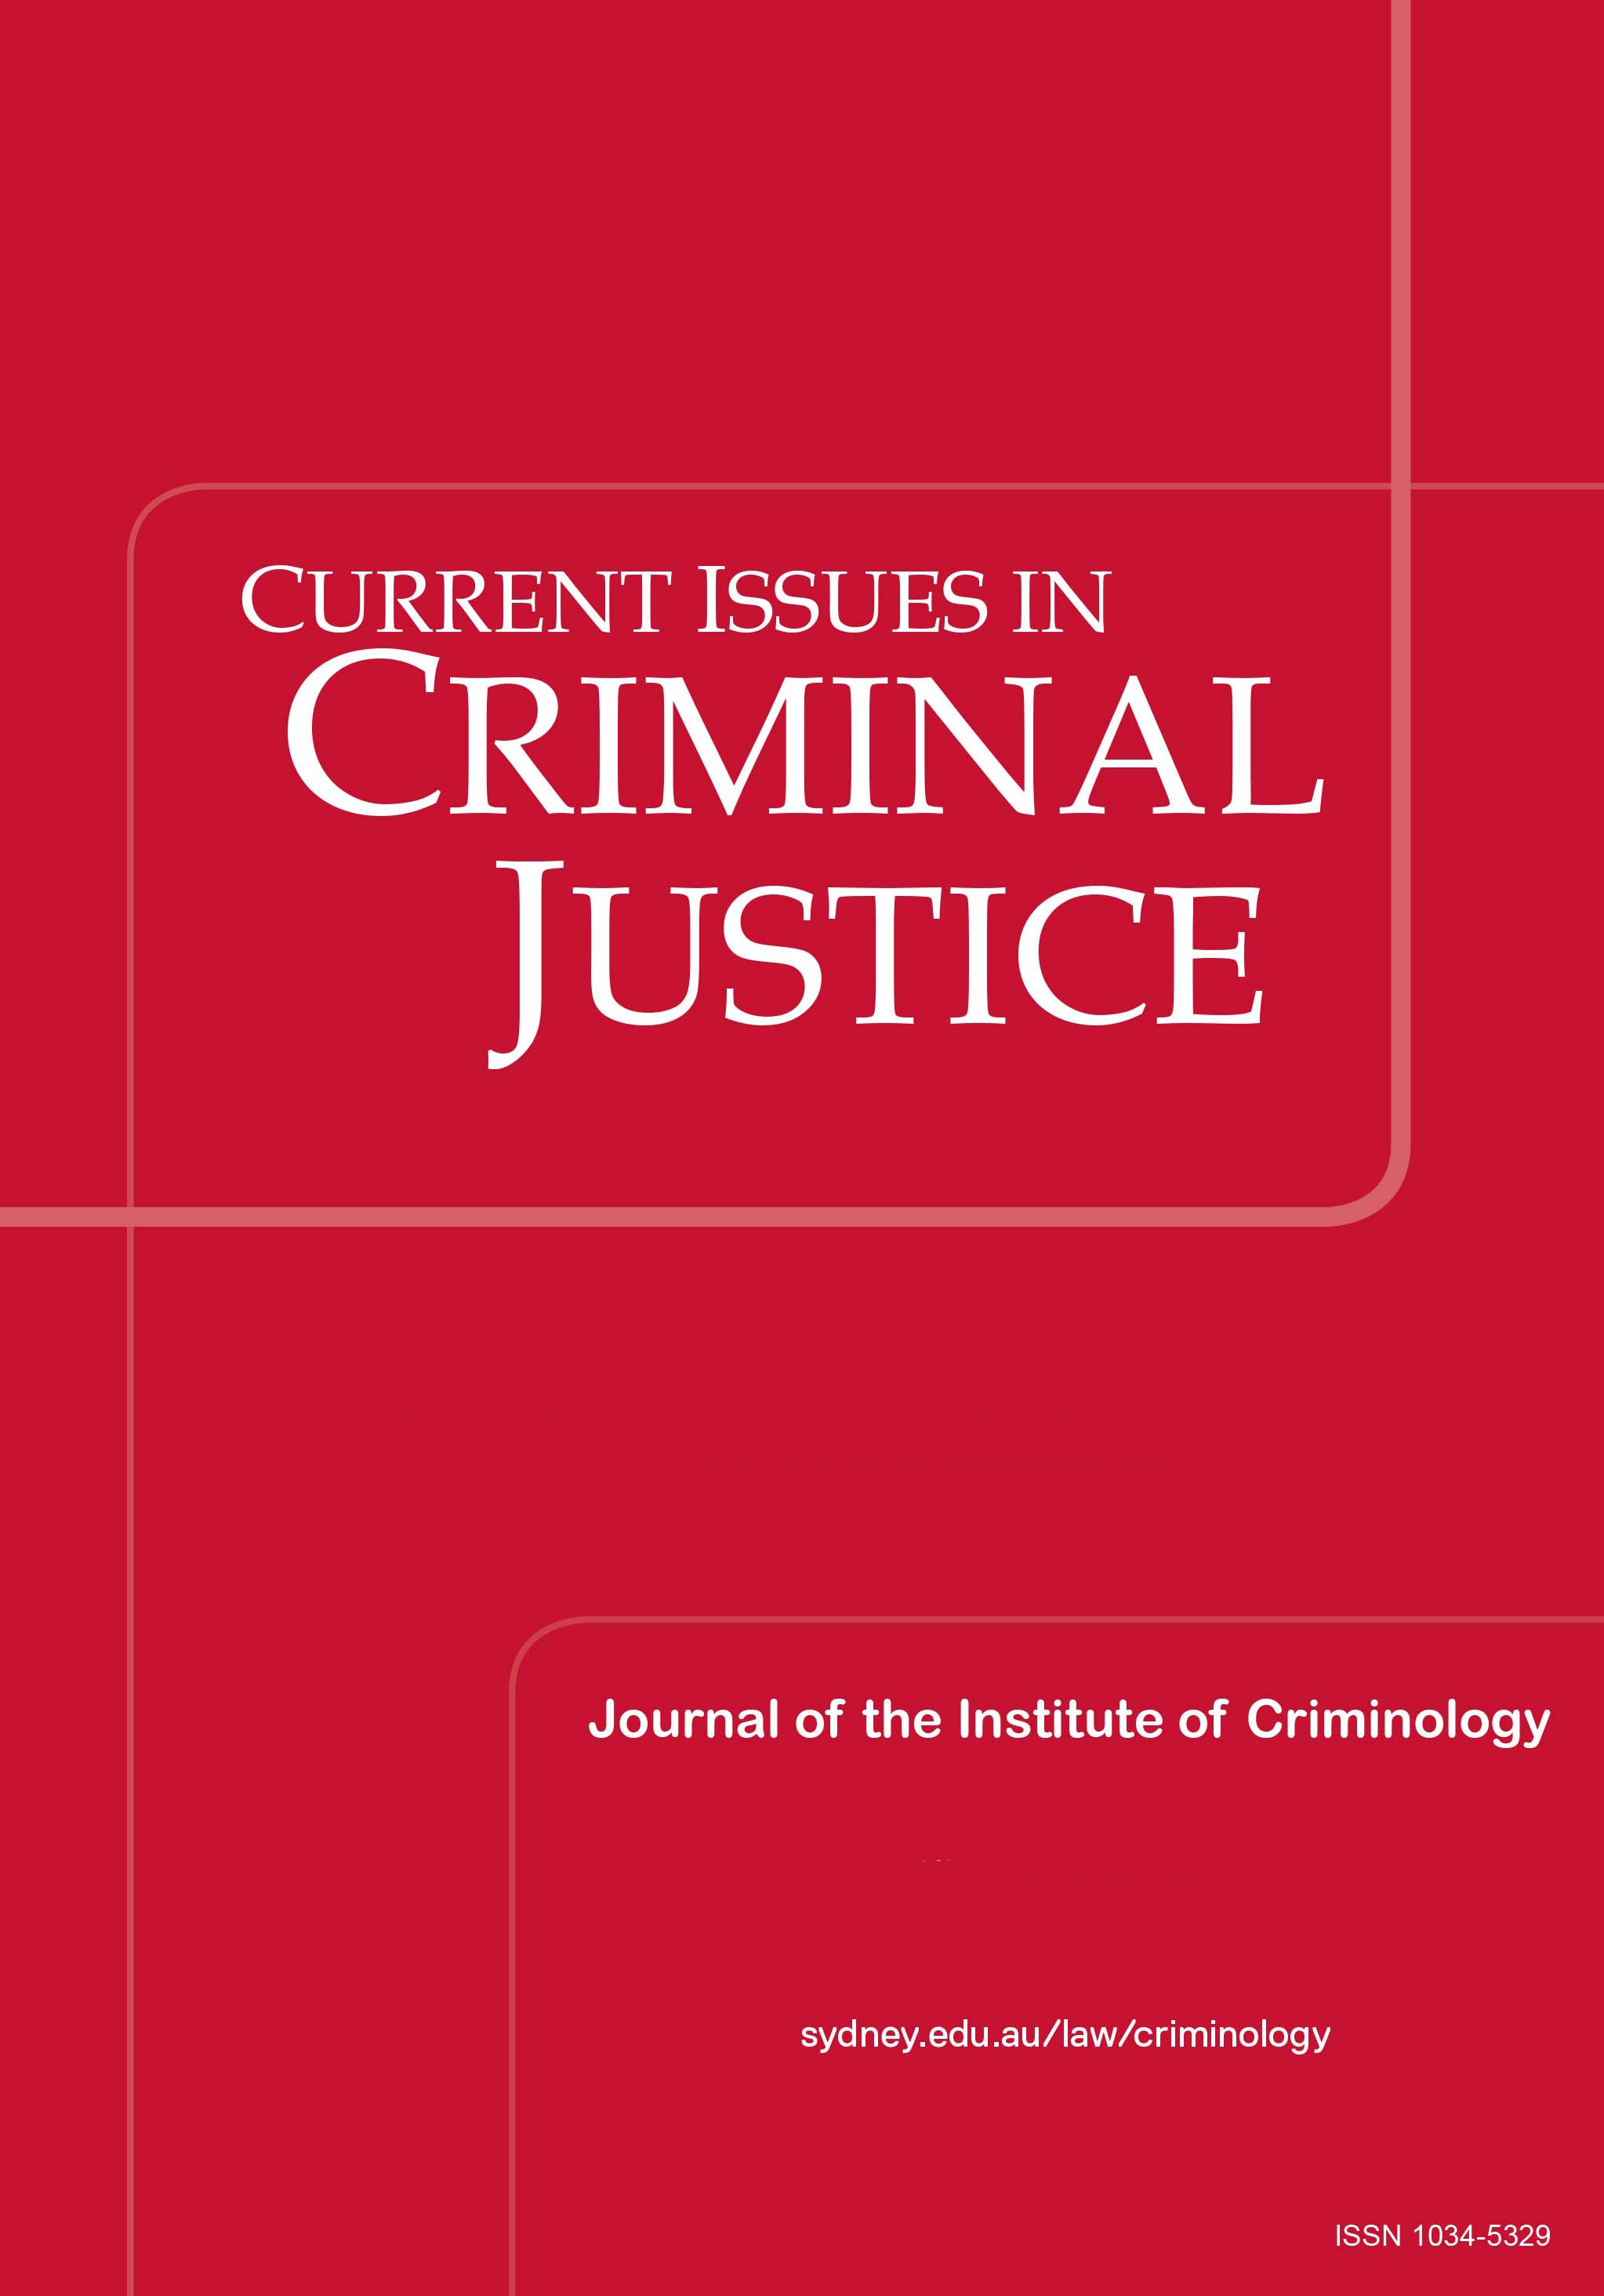 current issues in criminal justice - the university of sydney law school